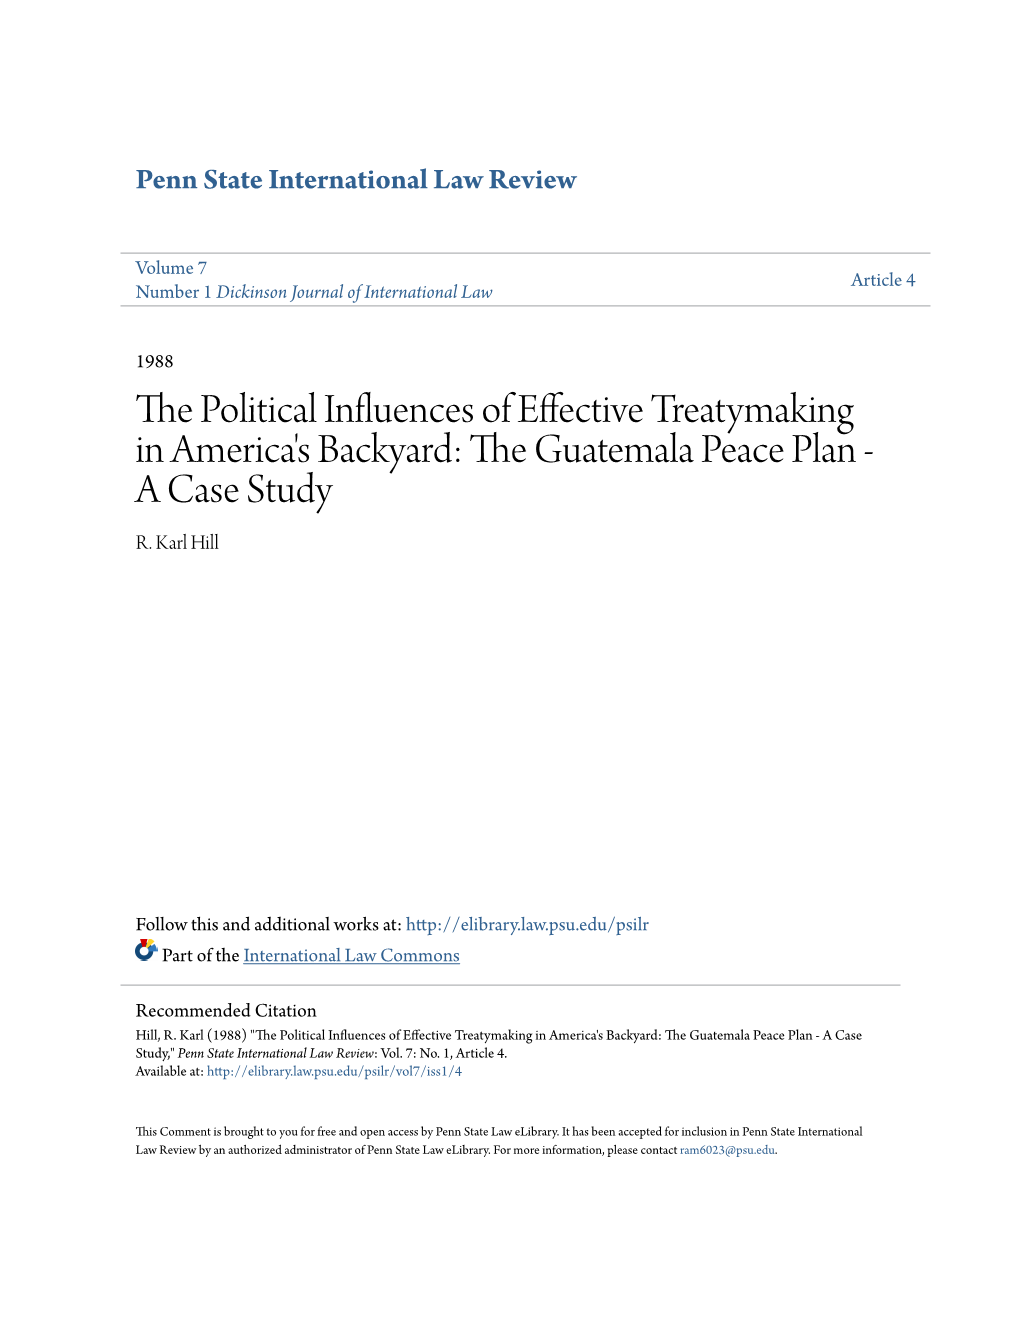 The Political Influences of Effective Treatymaking in America's